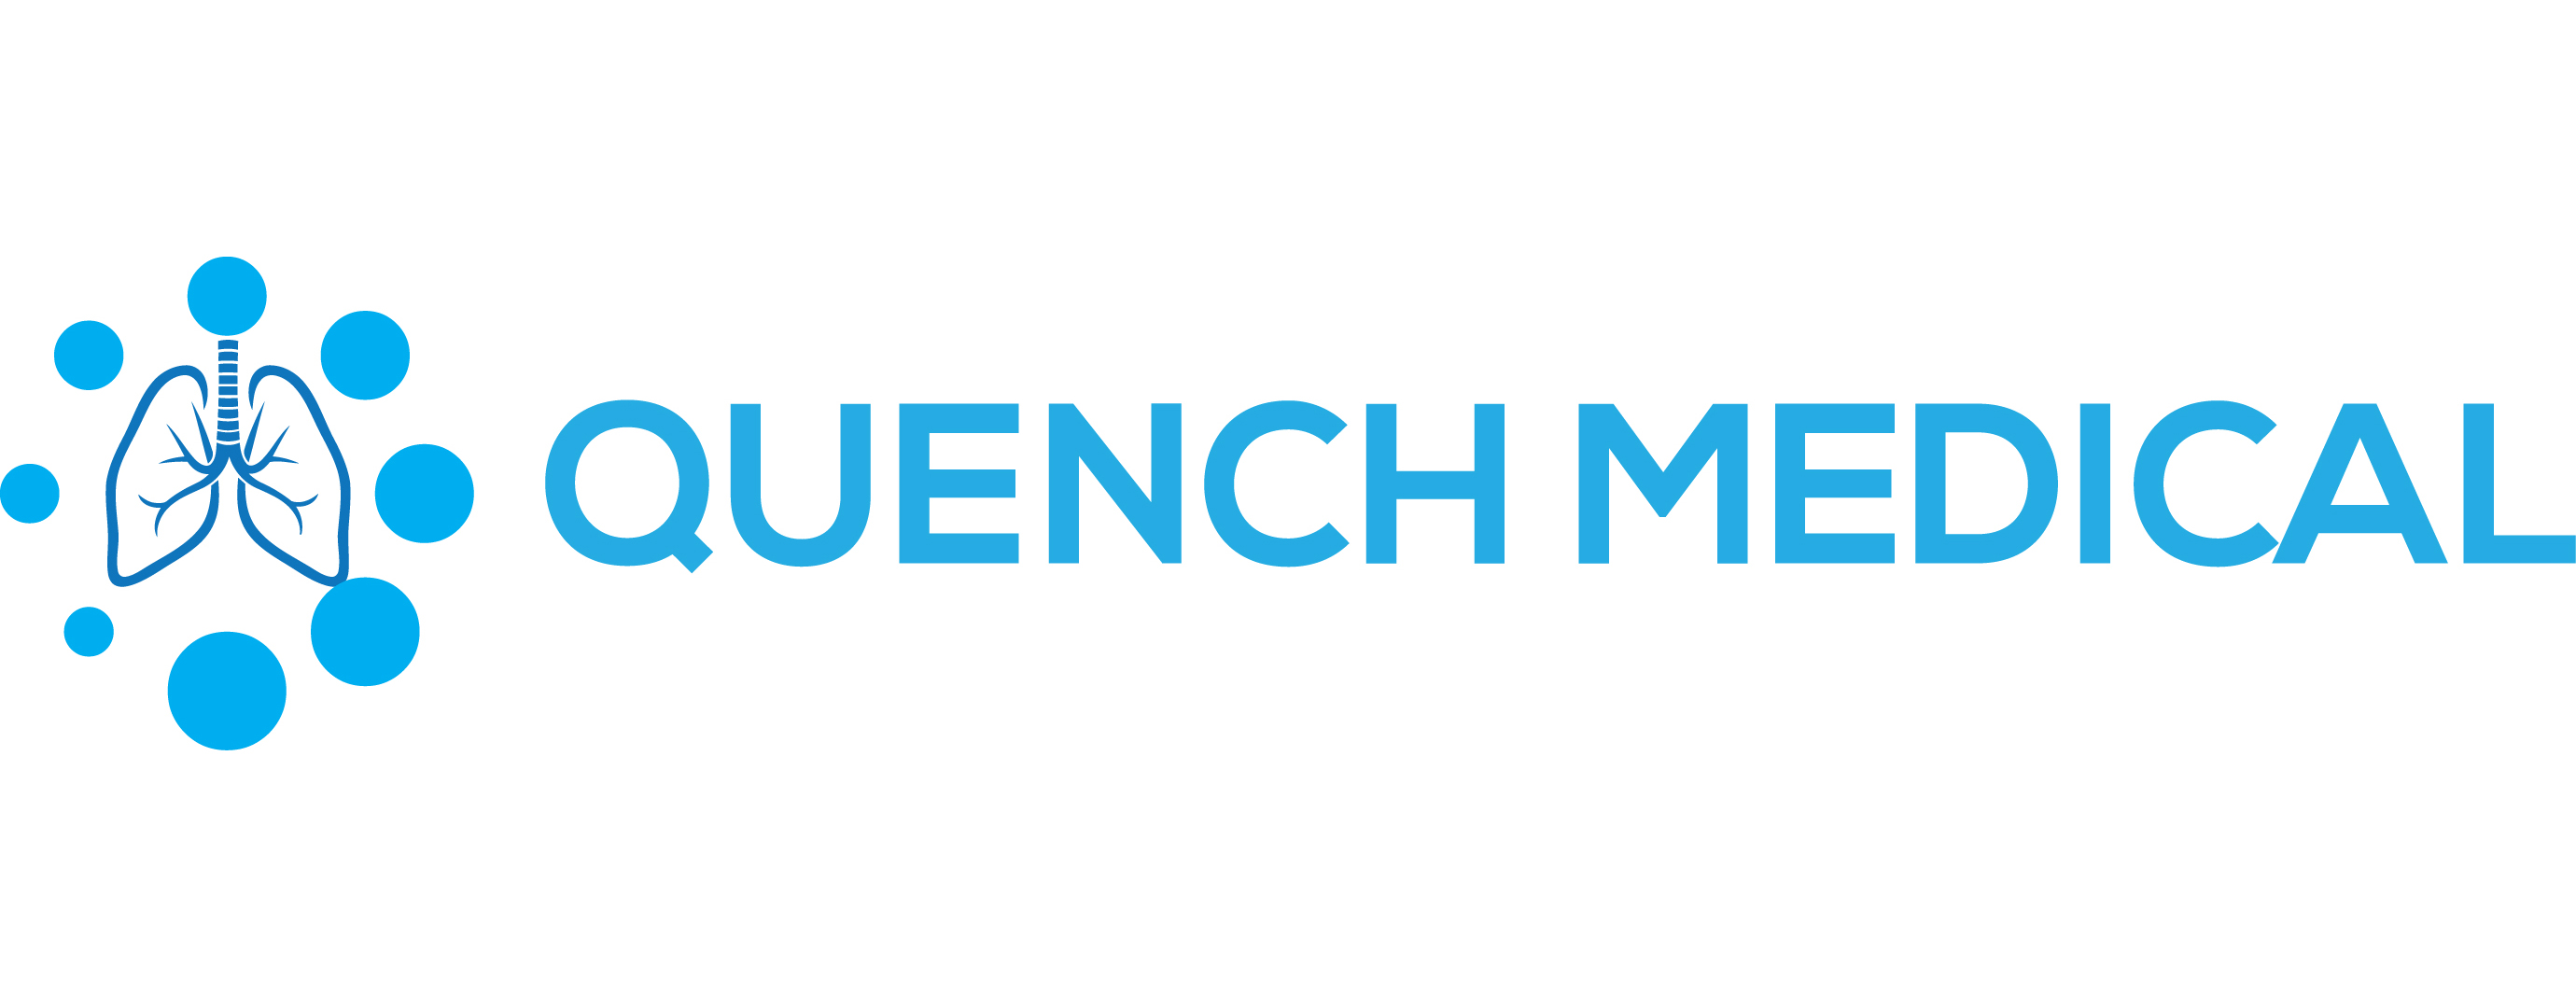 Image result for quench medical logo"